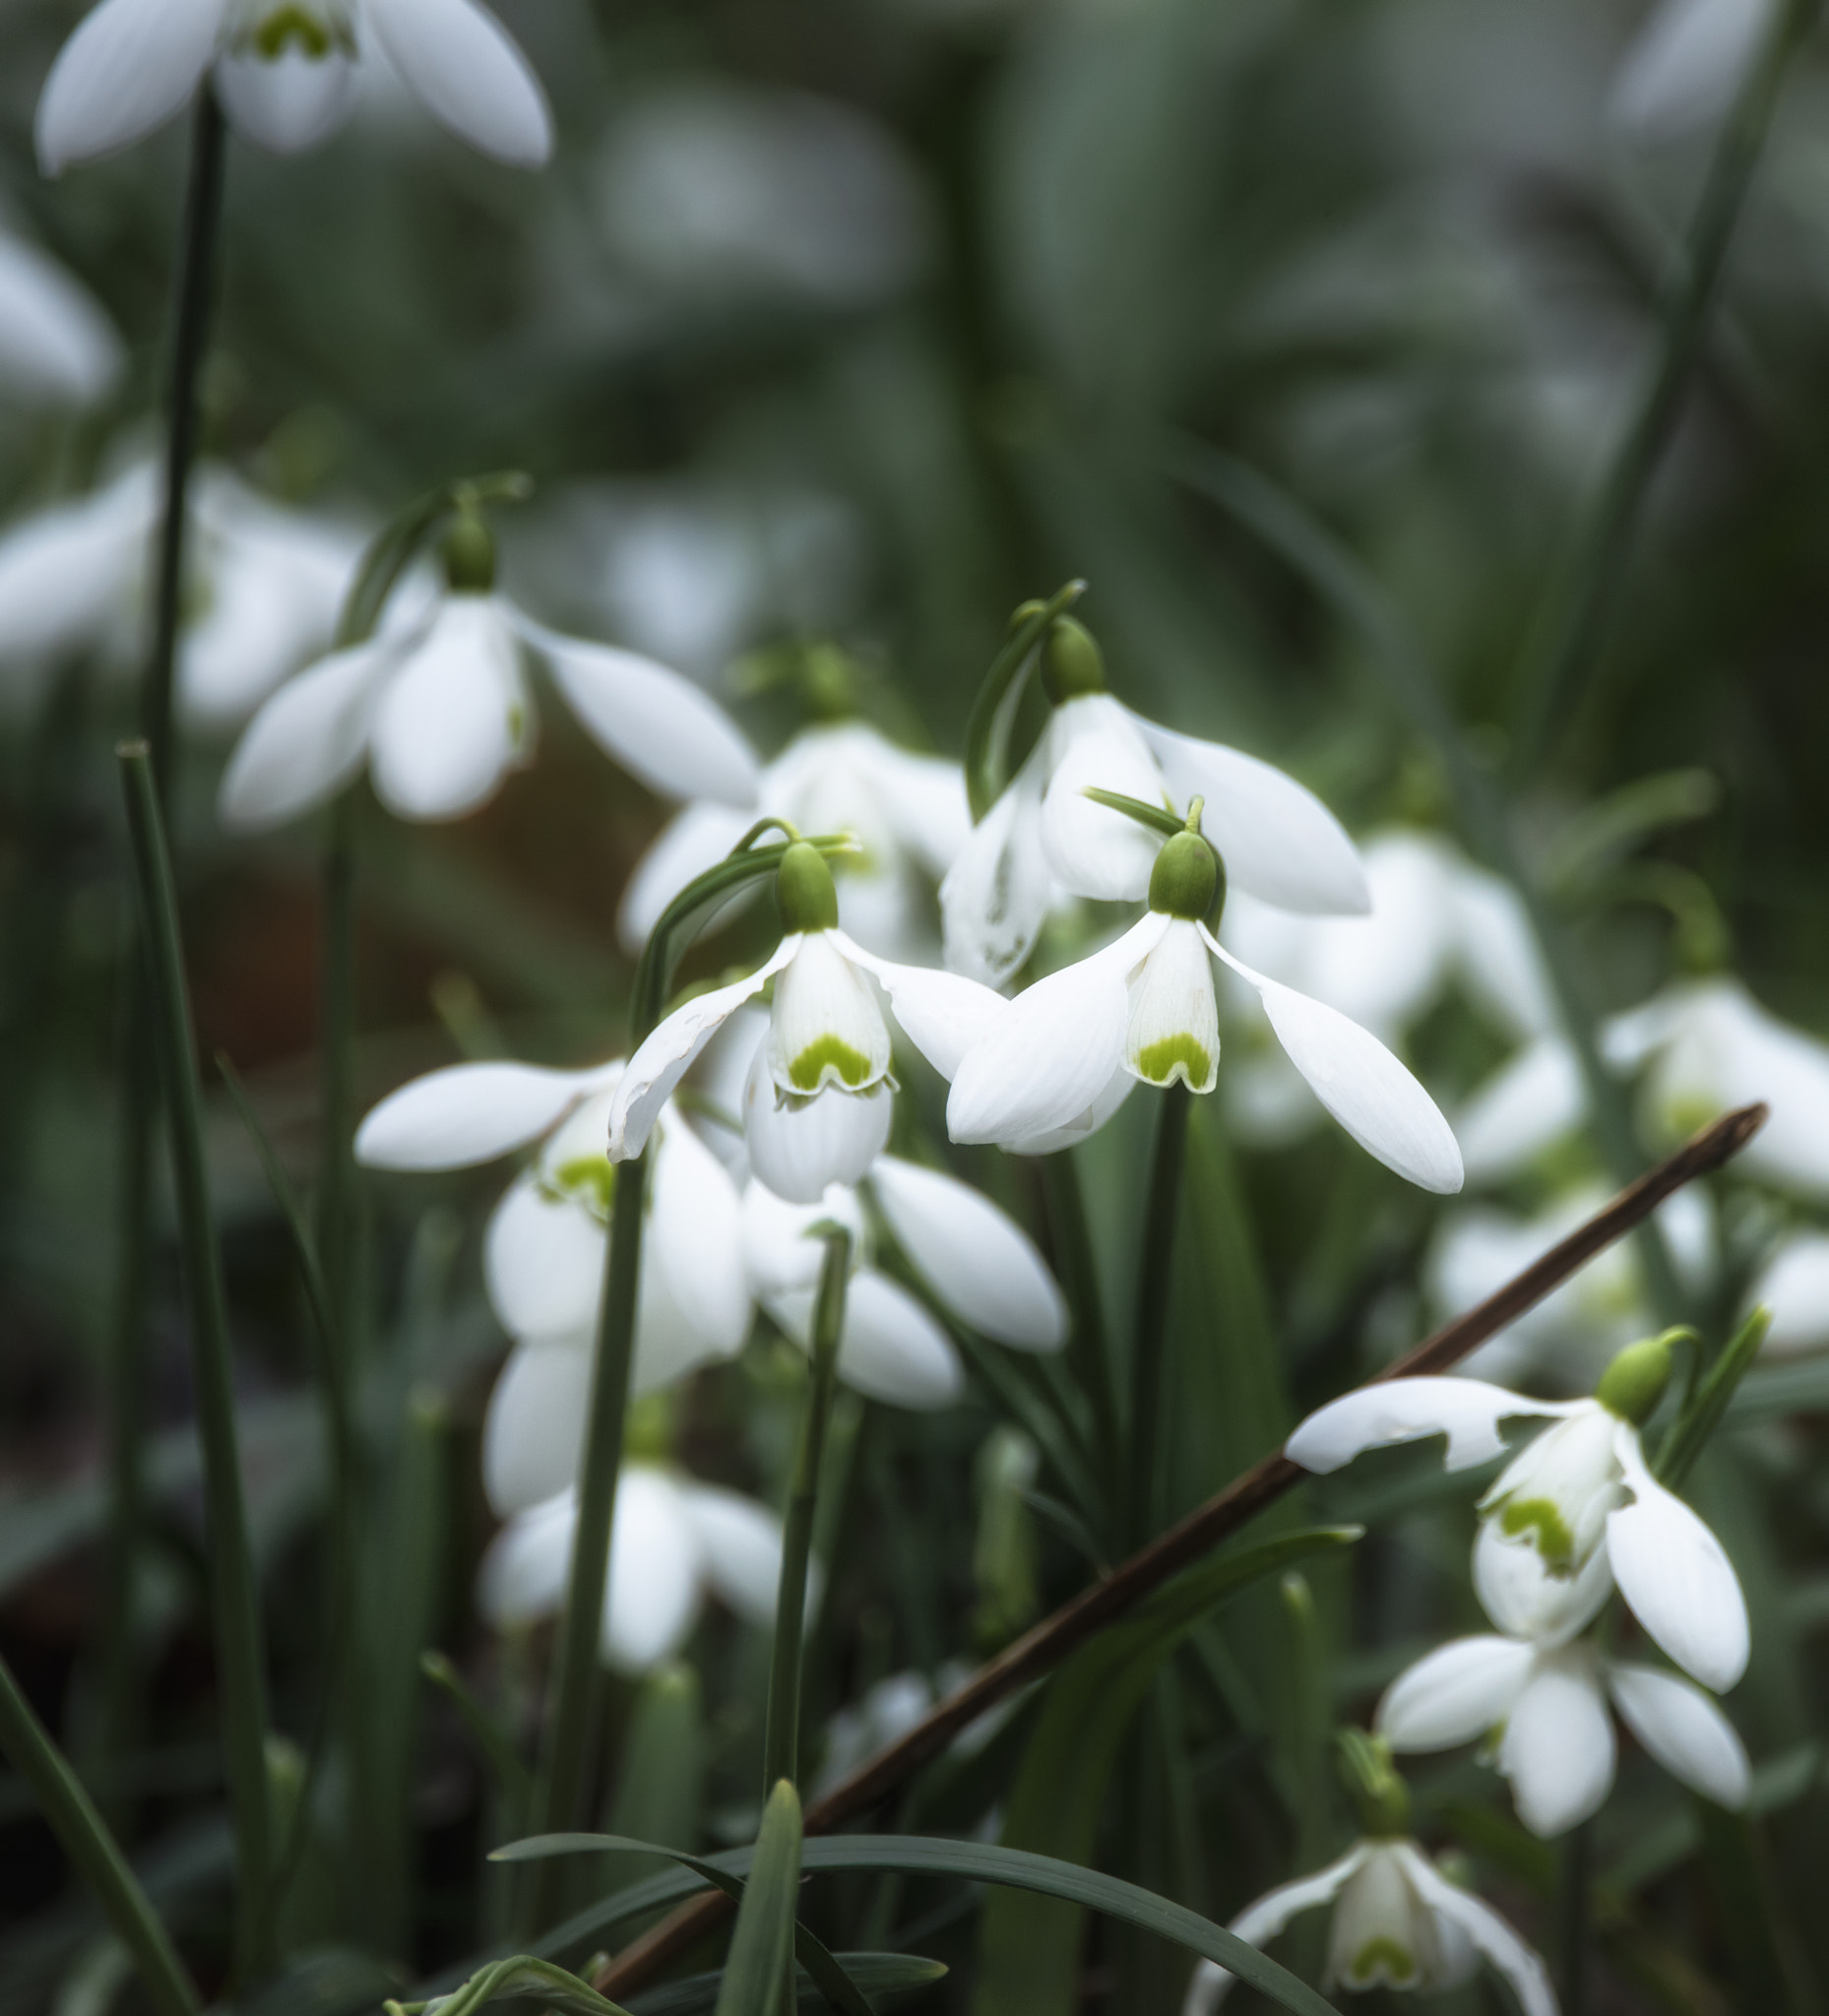 Nikon D800 + Sigma 150-600mm F5-6.3 DG OS HSM | C sample photo. Beautiful snowdrop galanthus flowers in full bloom in spring for photography